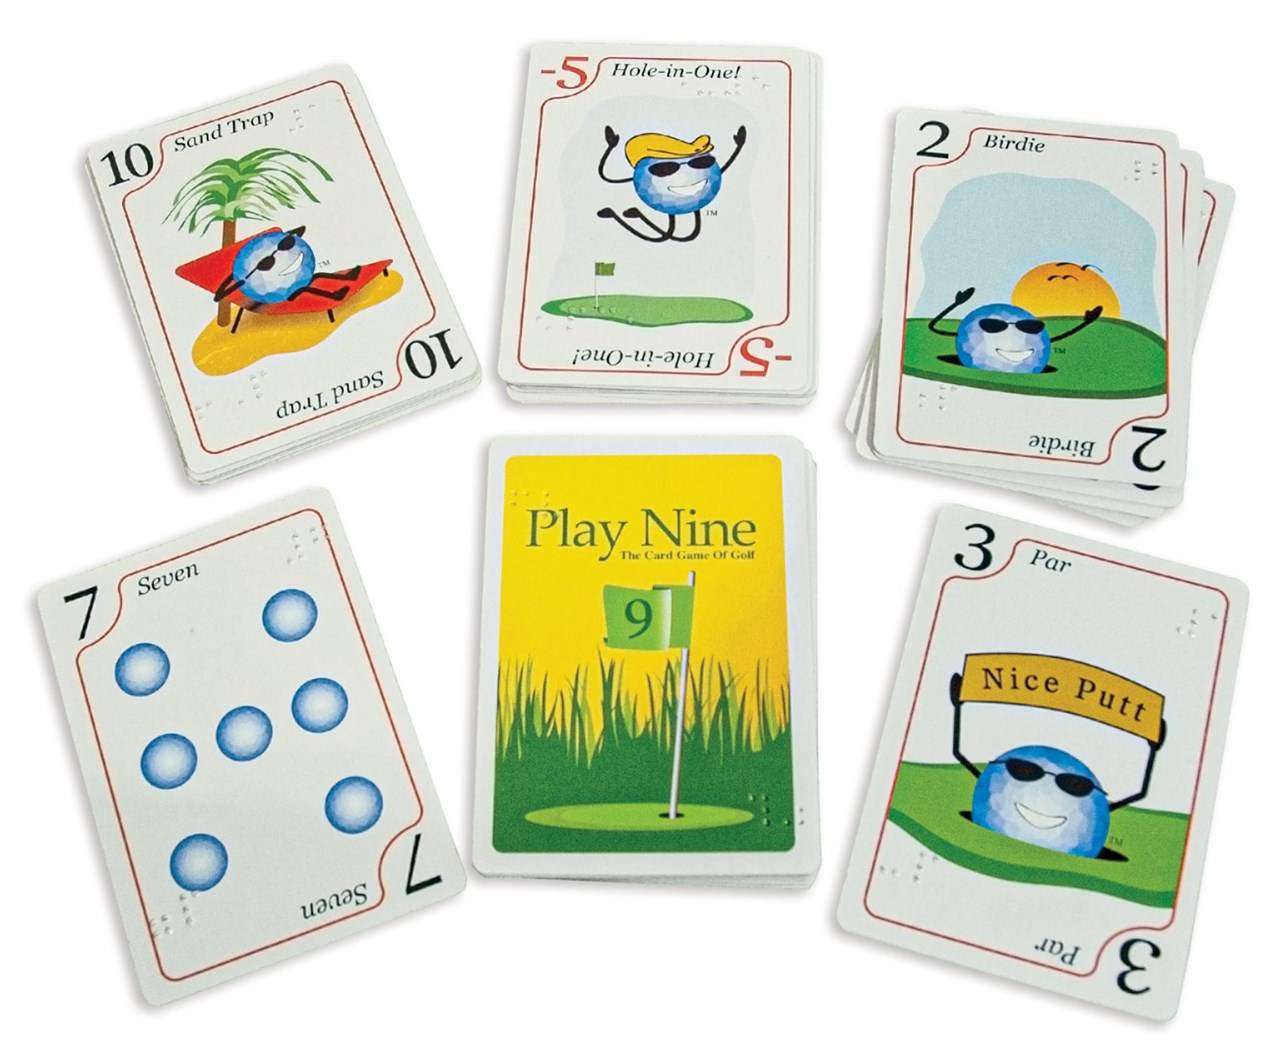 Play Nine—The Card Game of Golf! Brand New, Sealed!